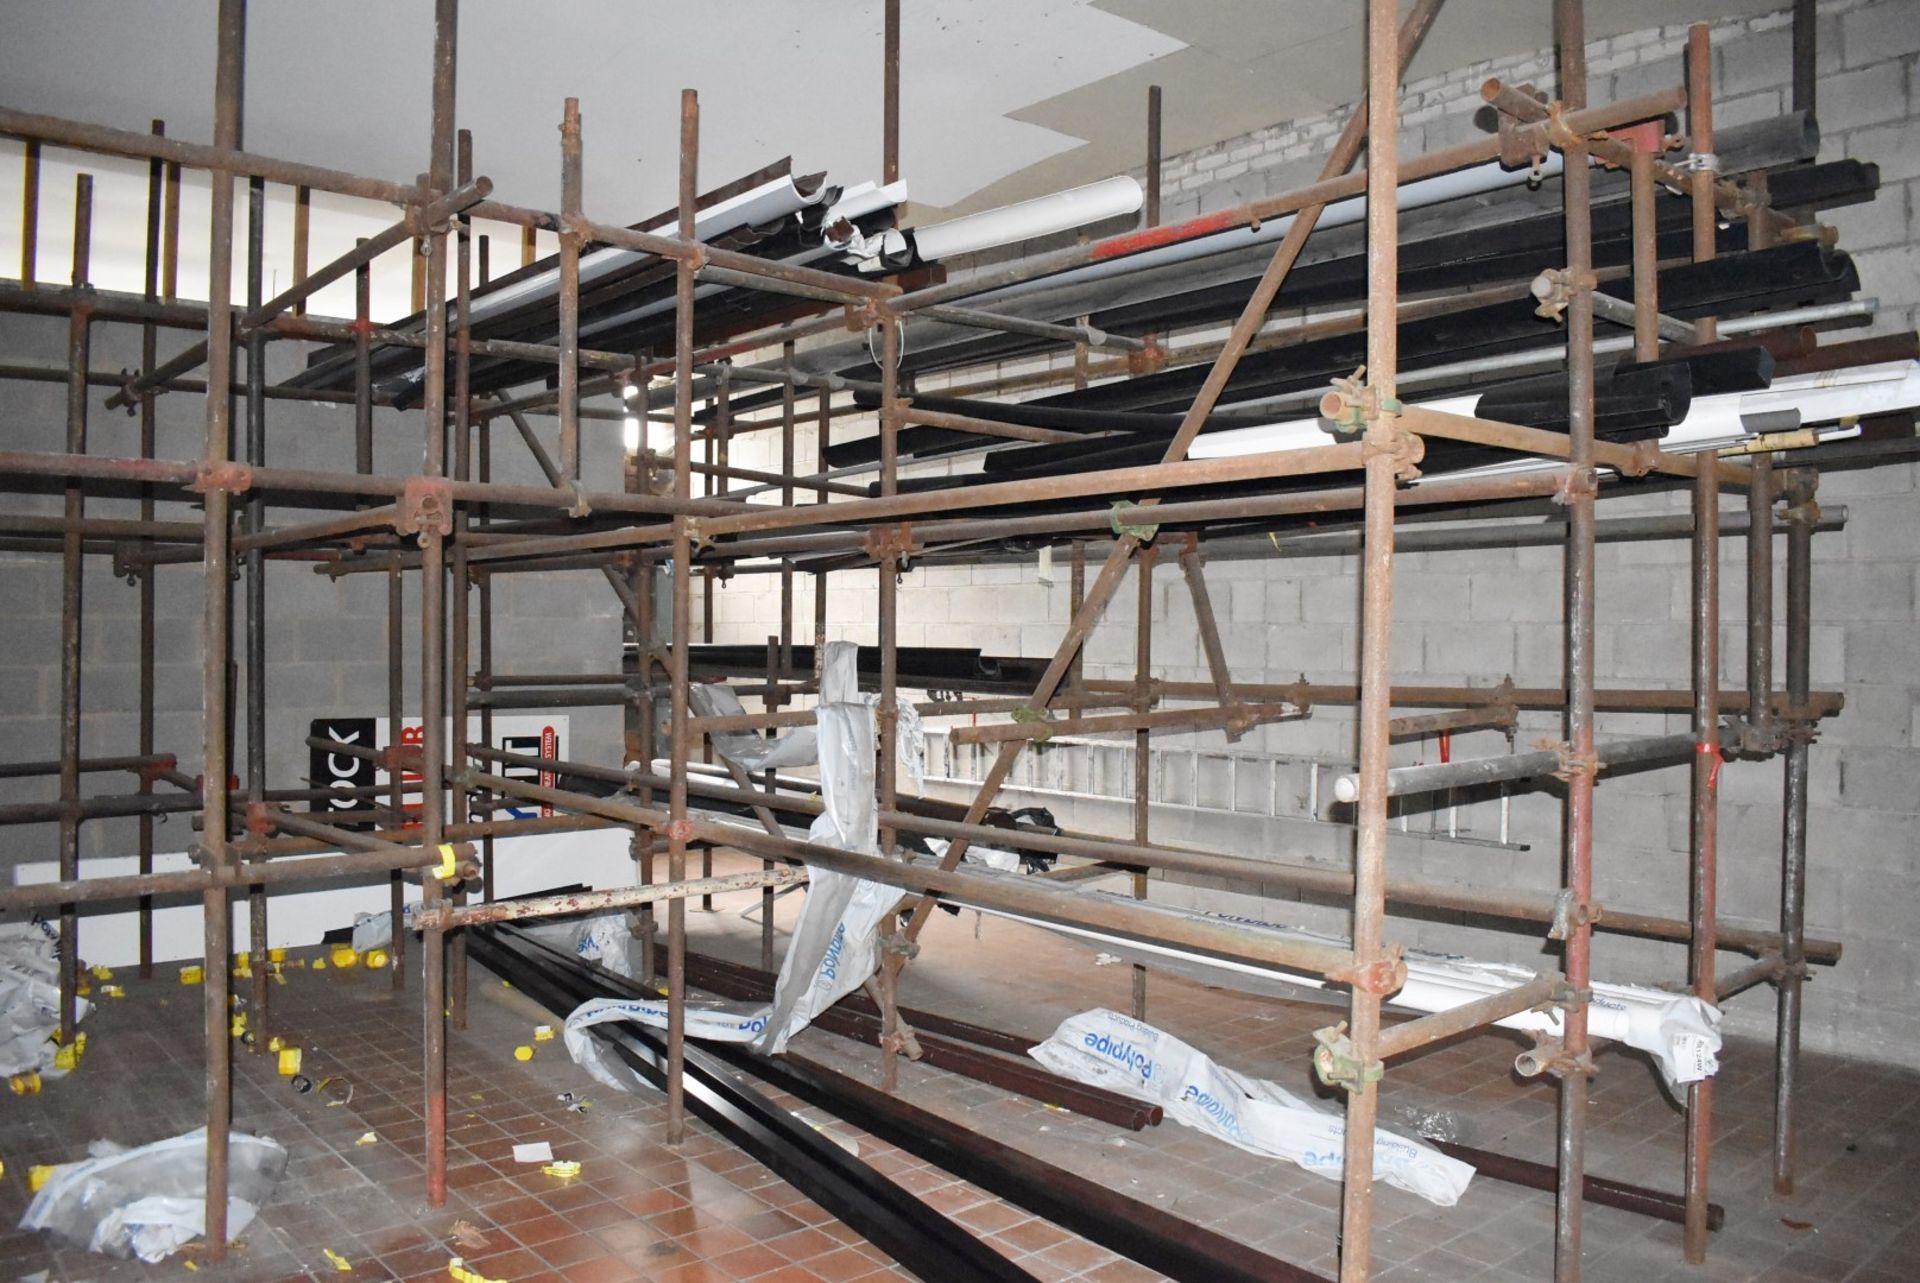 1 x Large Collection of Scaffolding and Fixtures Covering a Floor Space of Approx 13 x 13ft - Image 4 of 15